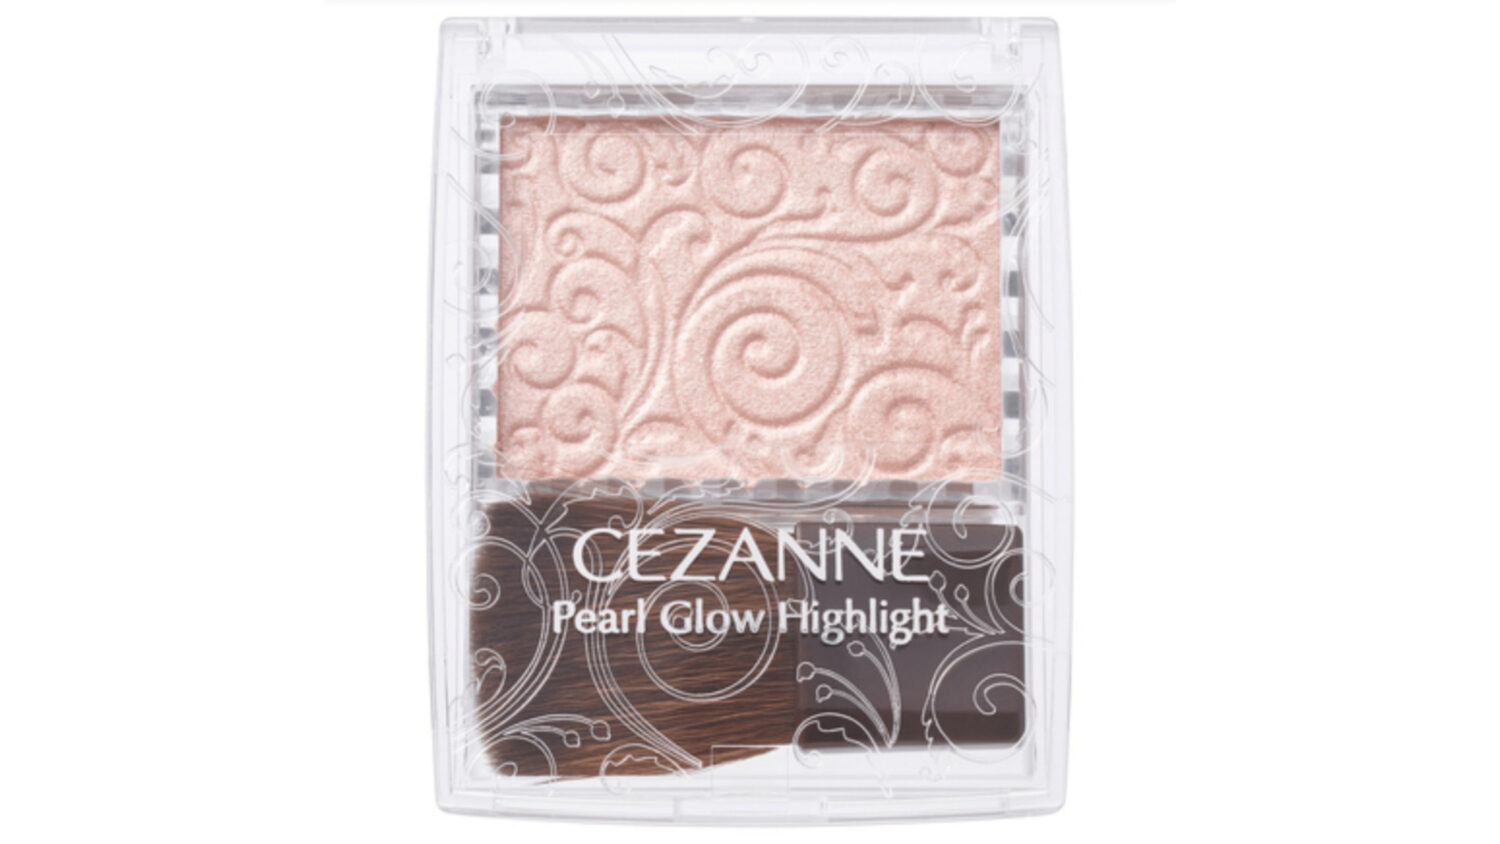 Pearl-Glow-Highlight-of-CEZANNE